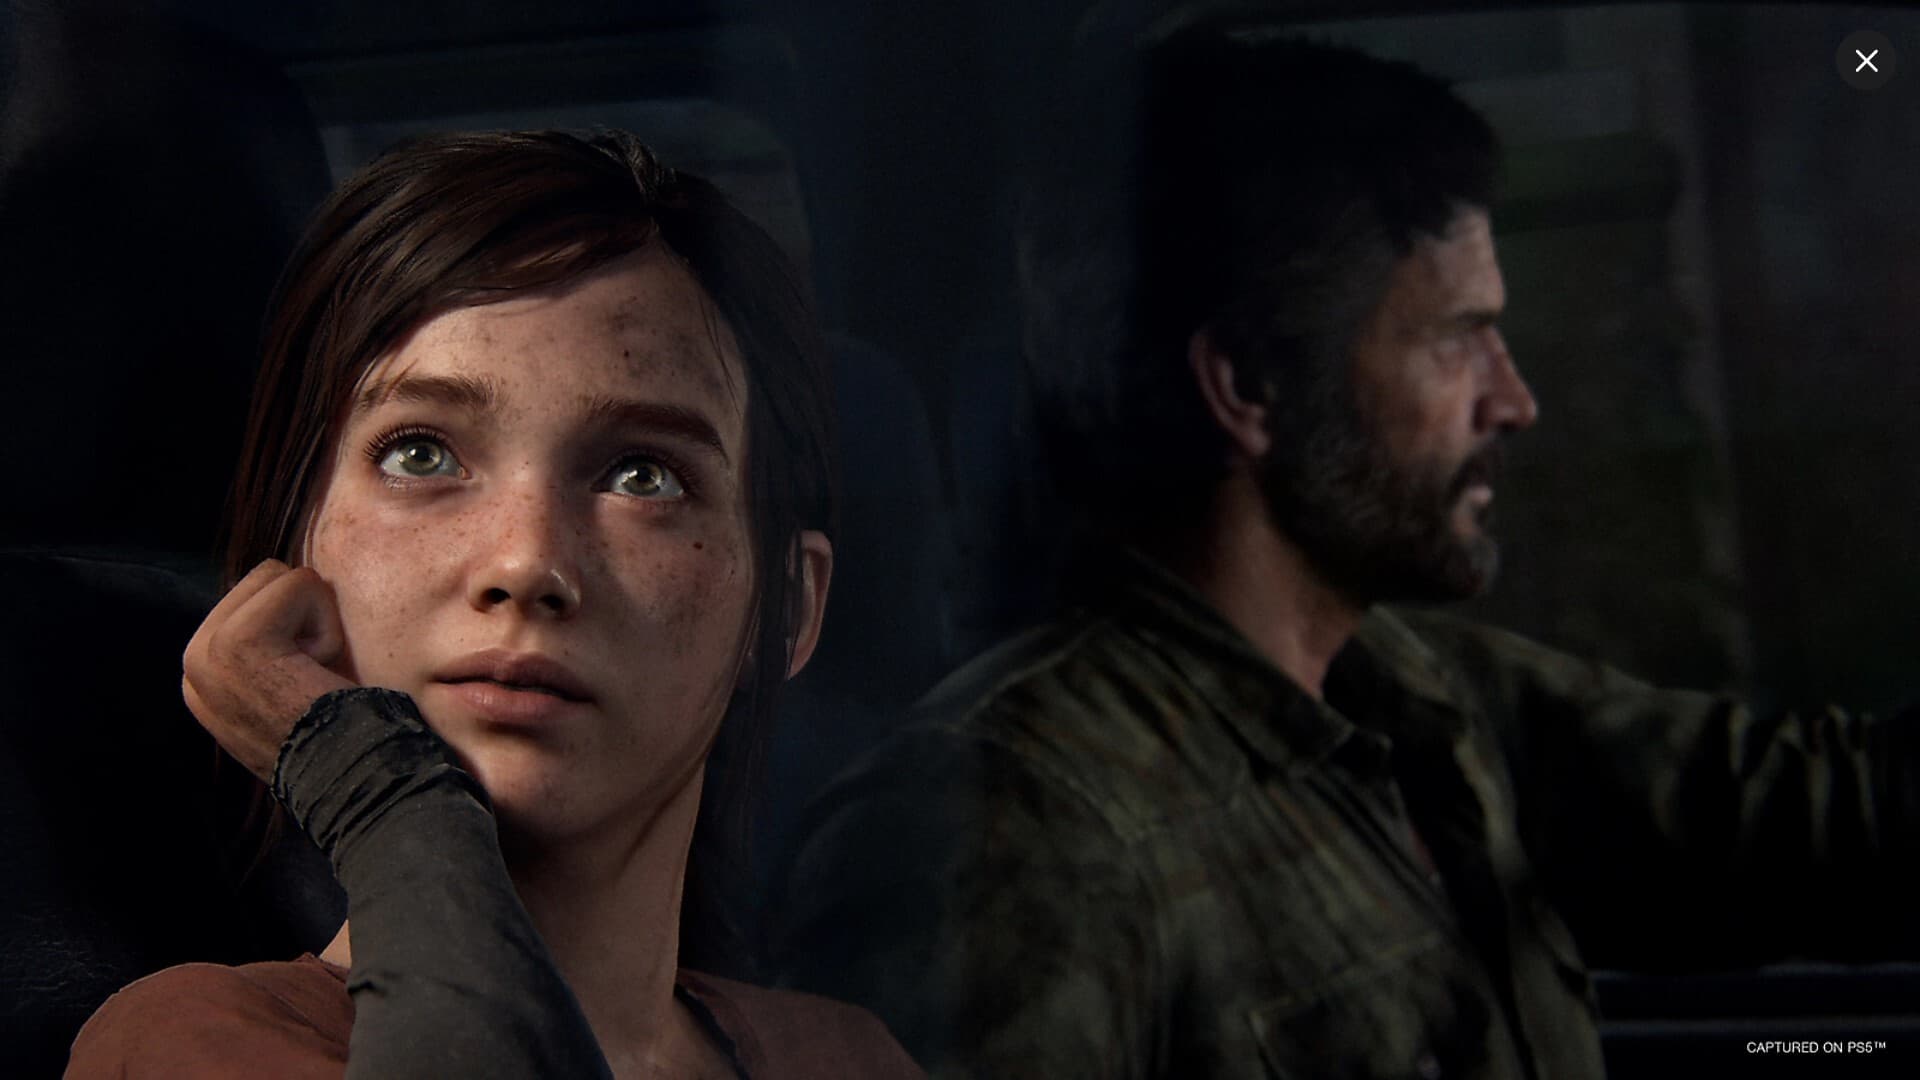 HBO's The Last of Us: Here's Who Original Joel Actor Troy Baker Plays